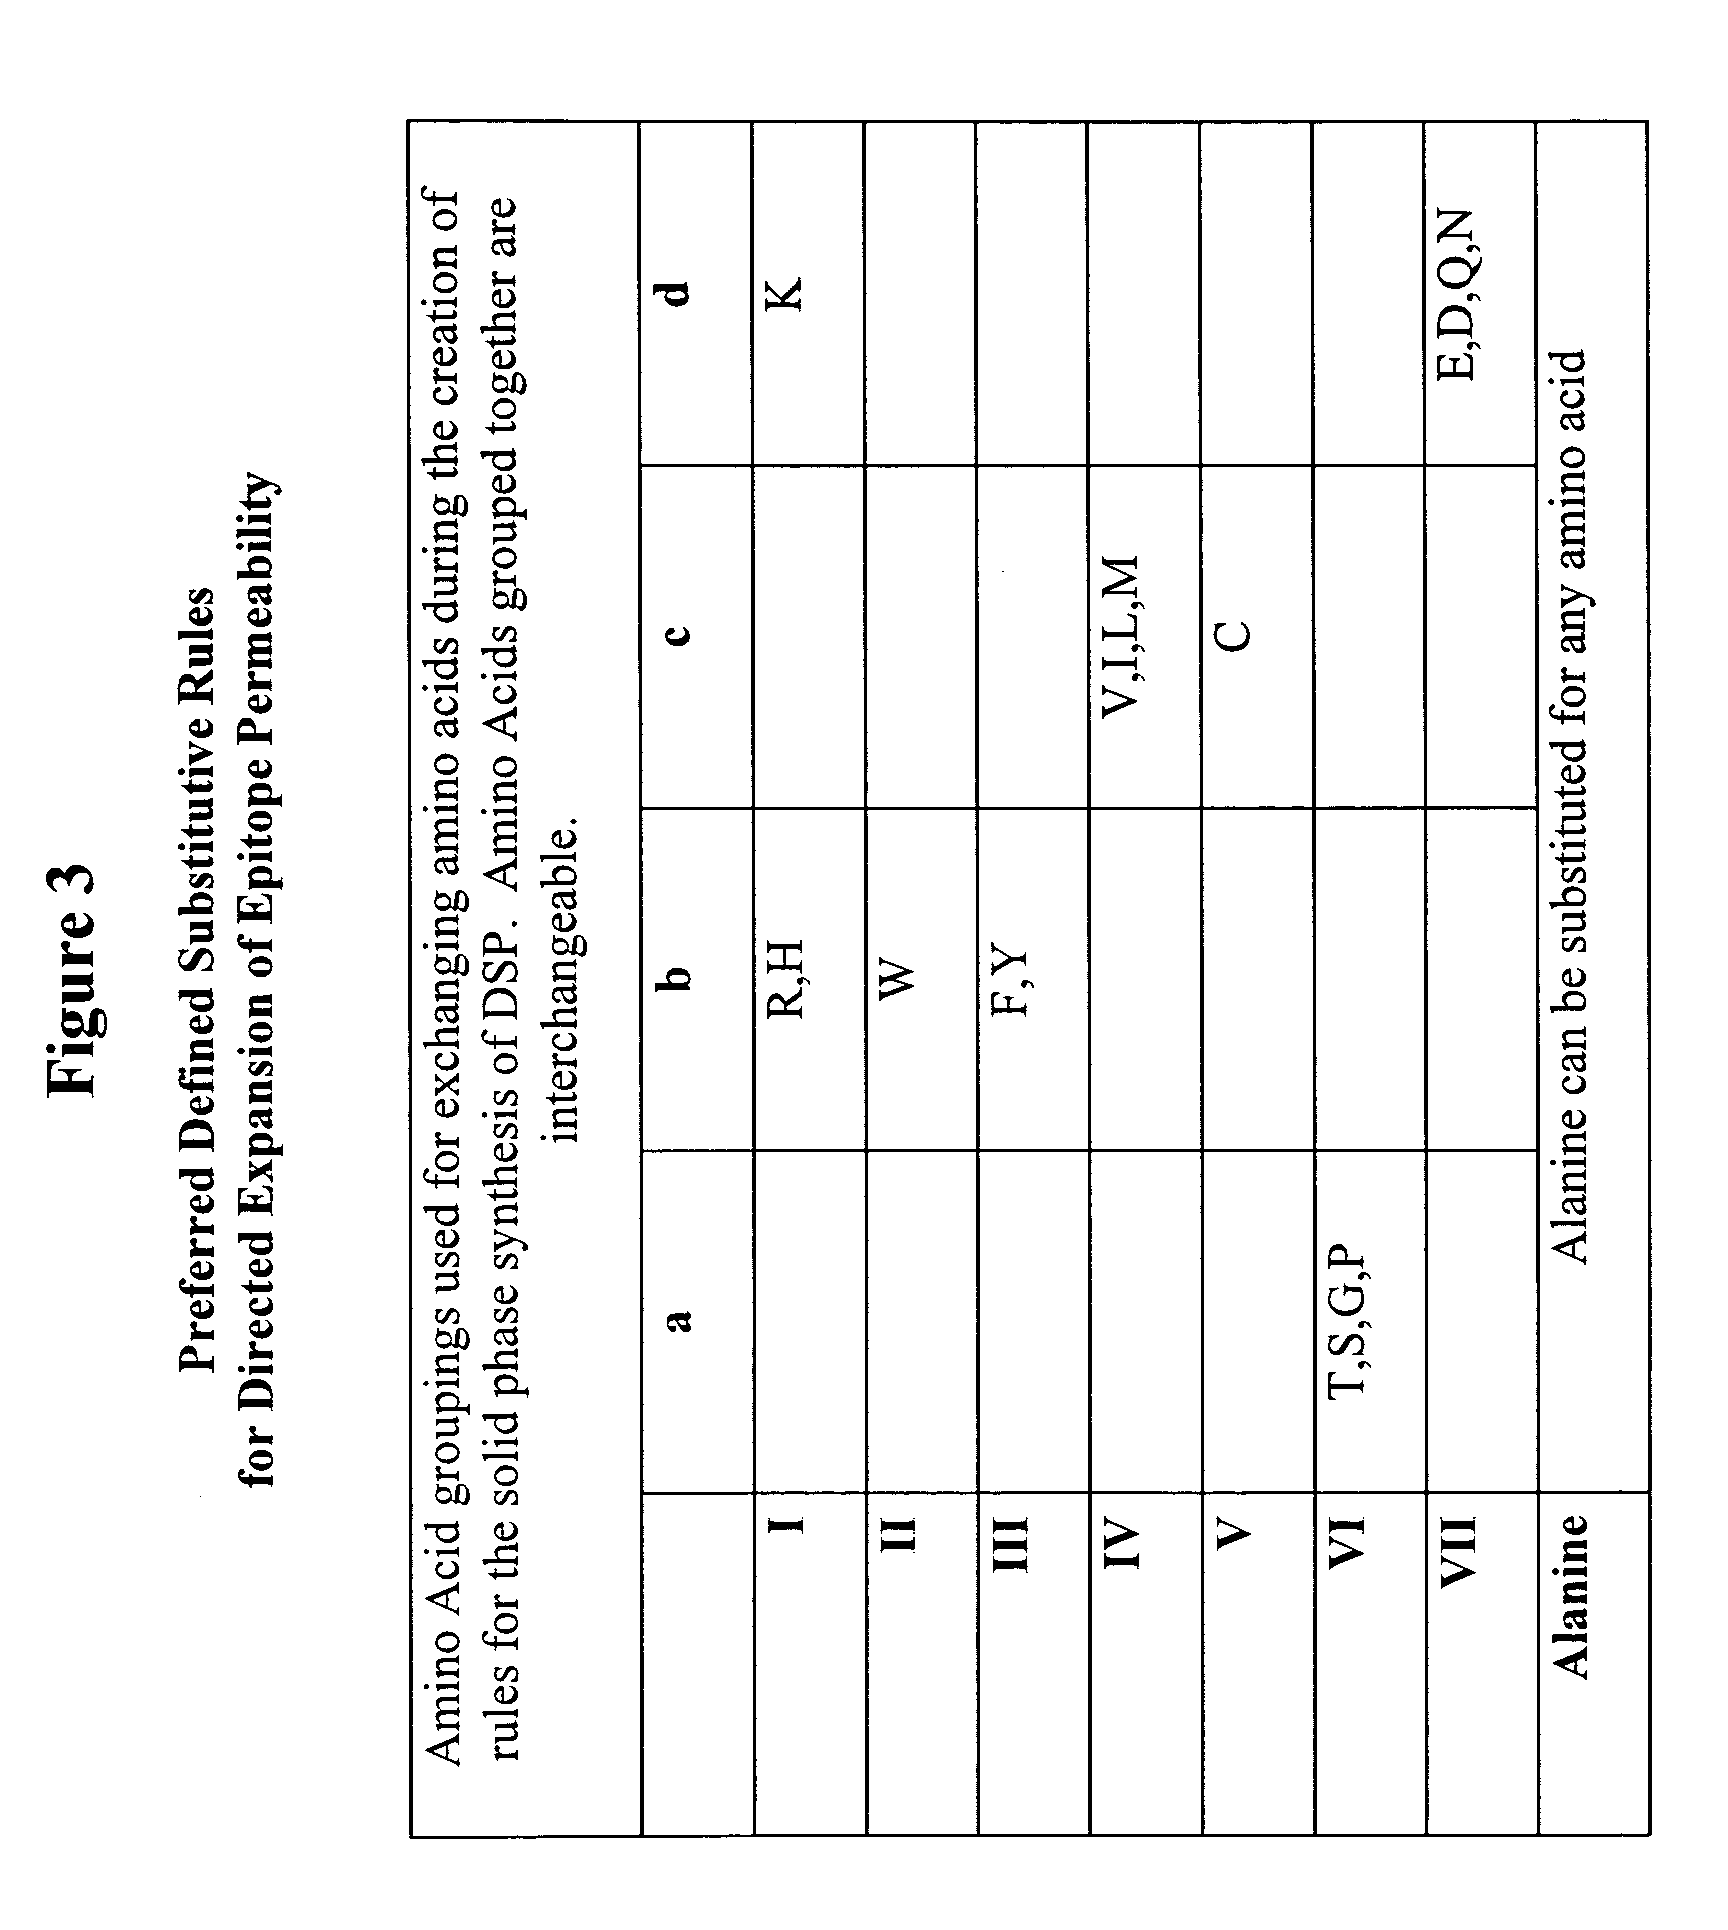 Methods for the directed expansion of epitopes for use as antibody ligands